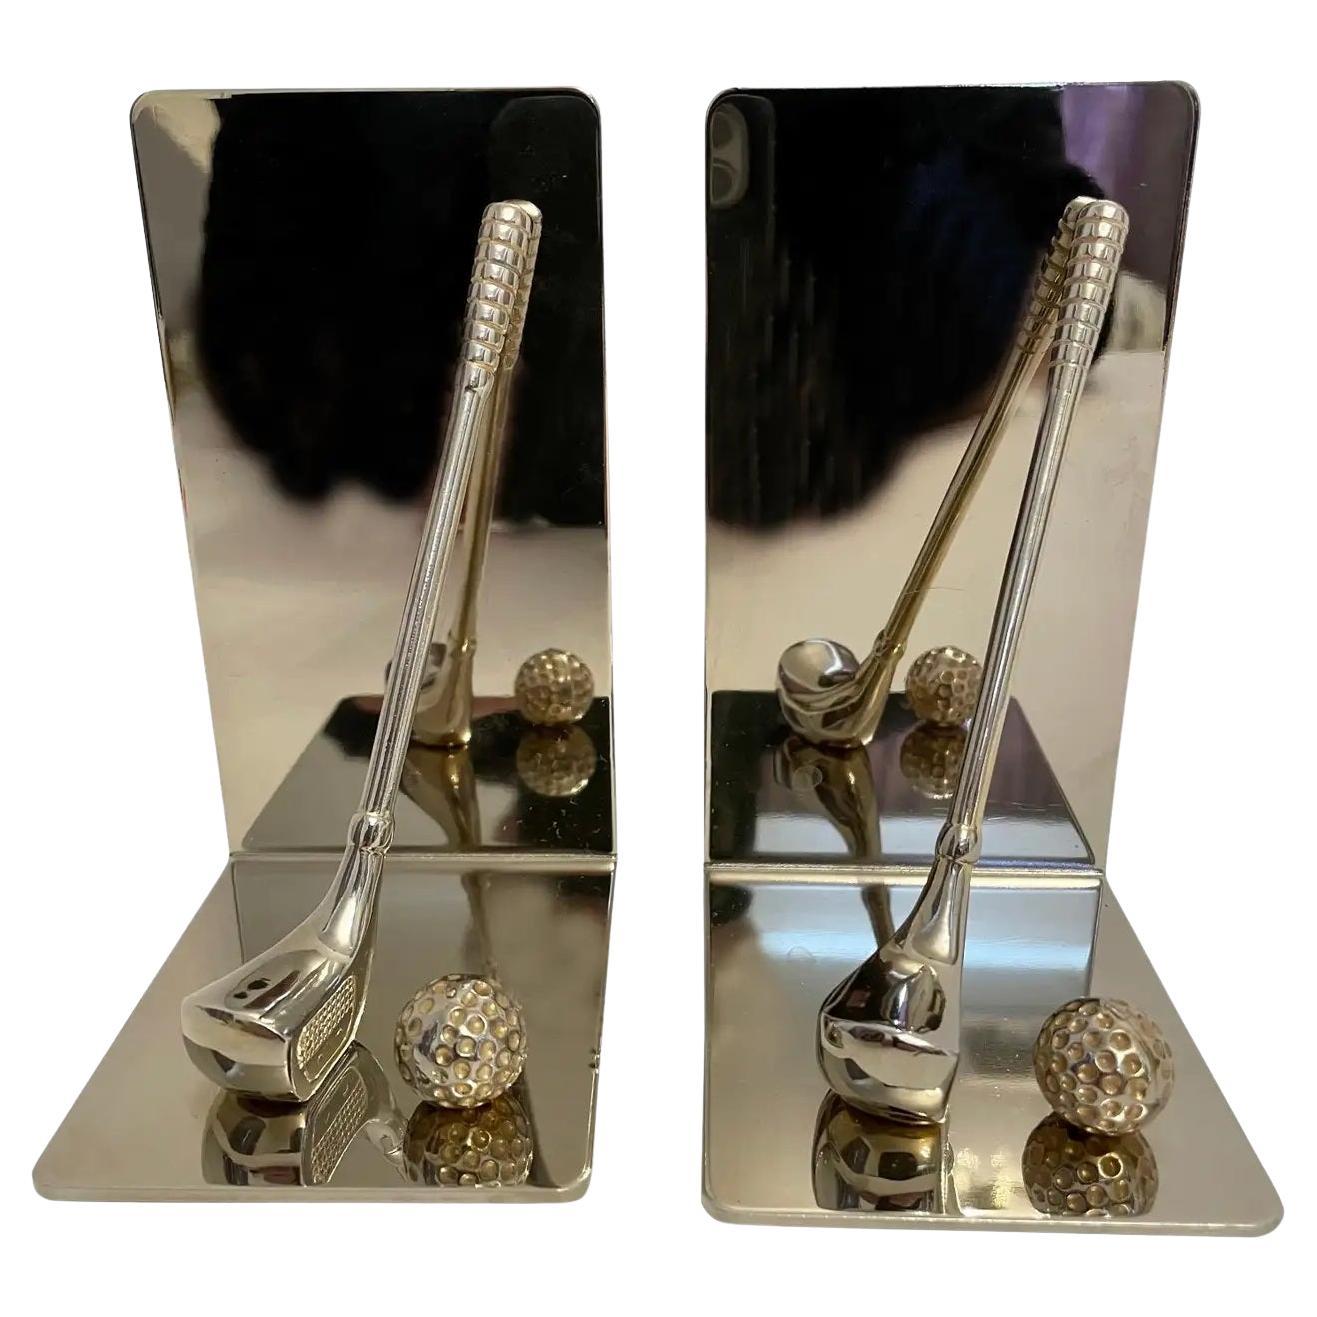 Set of brass and chrome golf bookends featuring brass club and ball with nice detail. Thin foam on bottom to prevent scratching. Great for the golfer or man cave or she shed. Very good overall condition. QUICK SHIP